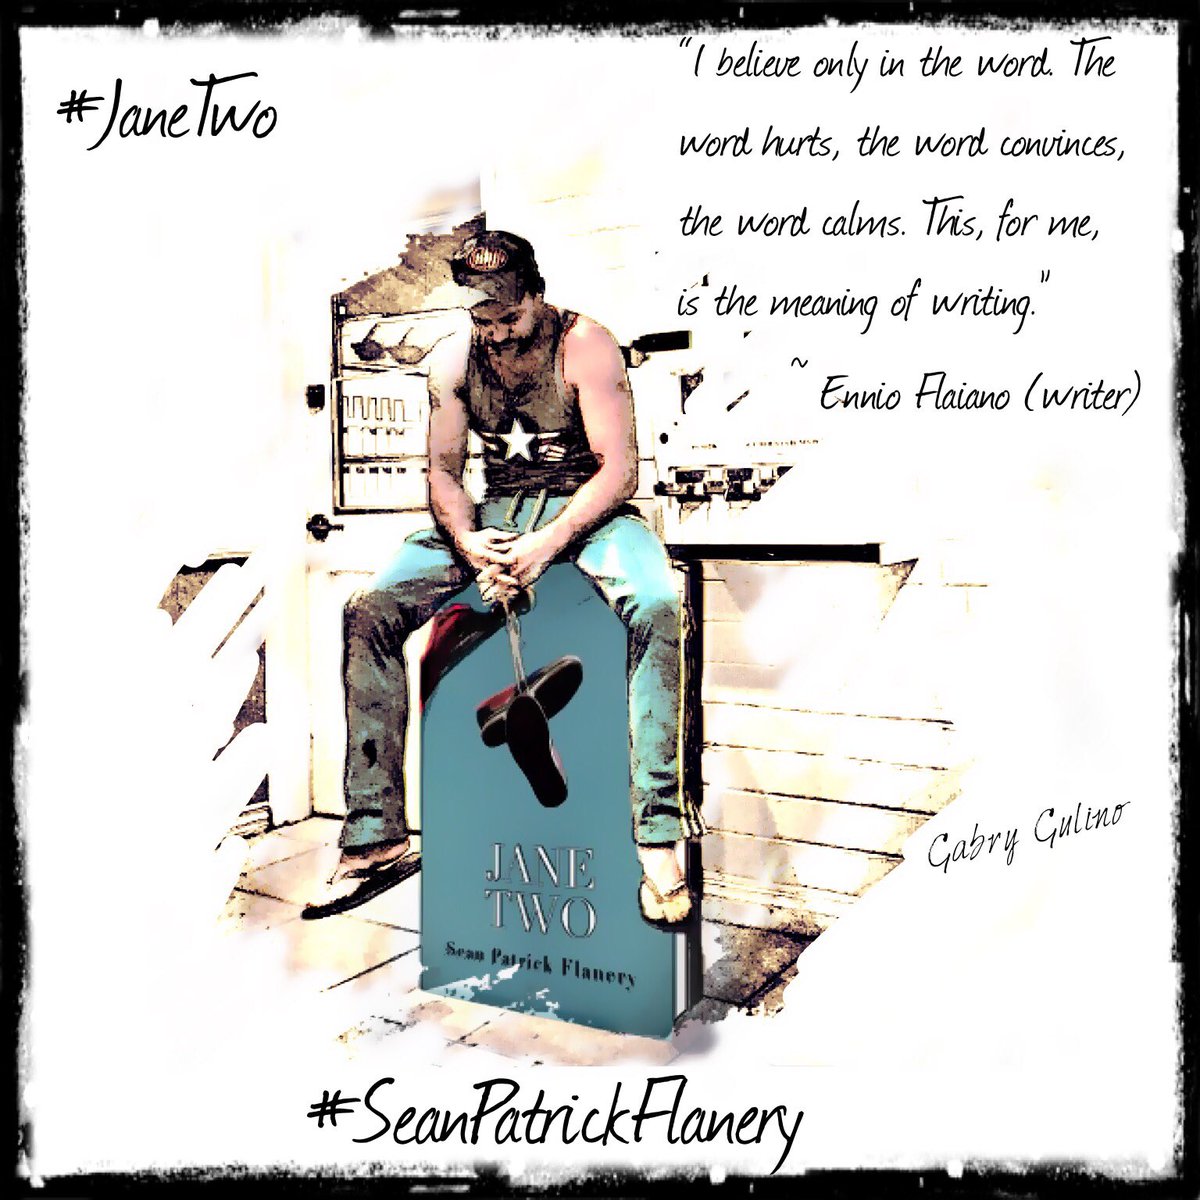 @seanflanery 'I believe only in the word. The word hurts, the word convinces, the word calms. This, for me, is the meaning of writing” ~ Ennio Flaiano(writer) 📘💜#seanpatrickflanery #JaneTwo #novel #ennioflaiano #goodbook #writer